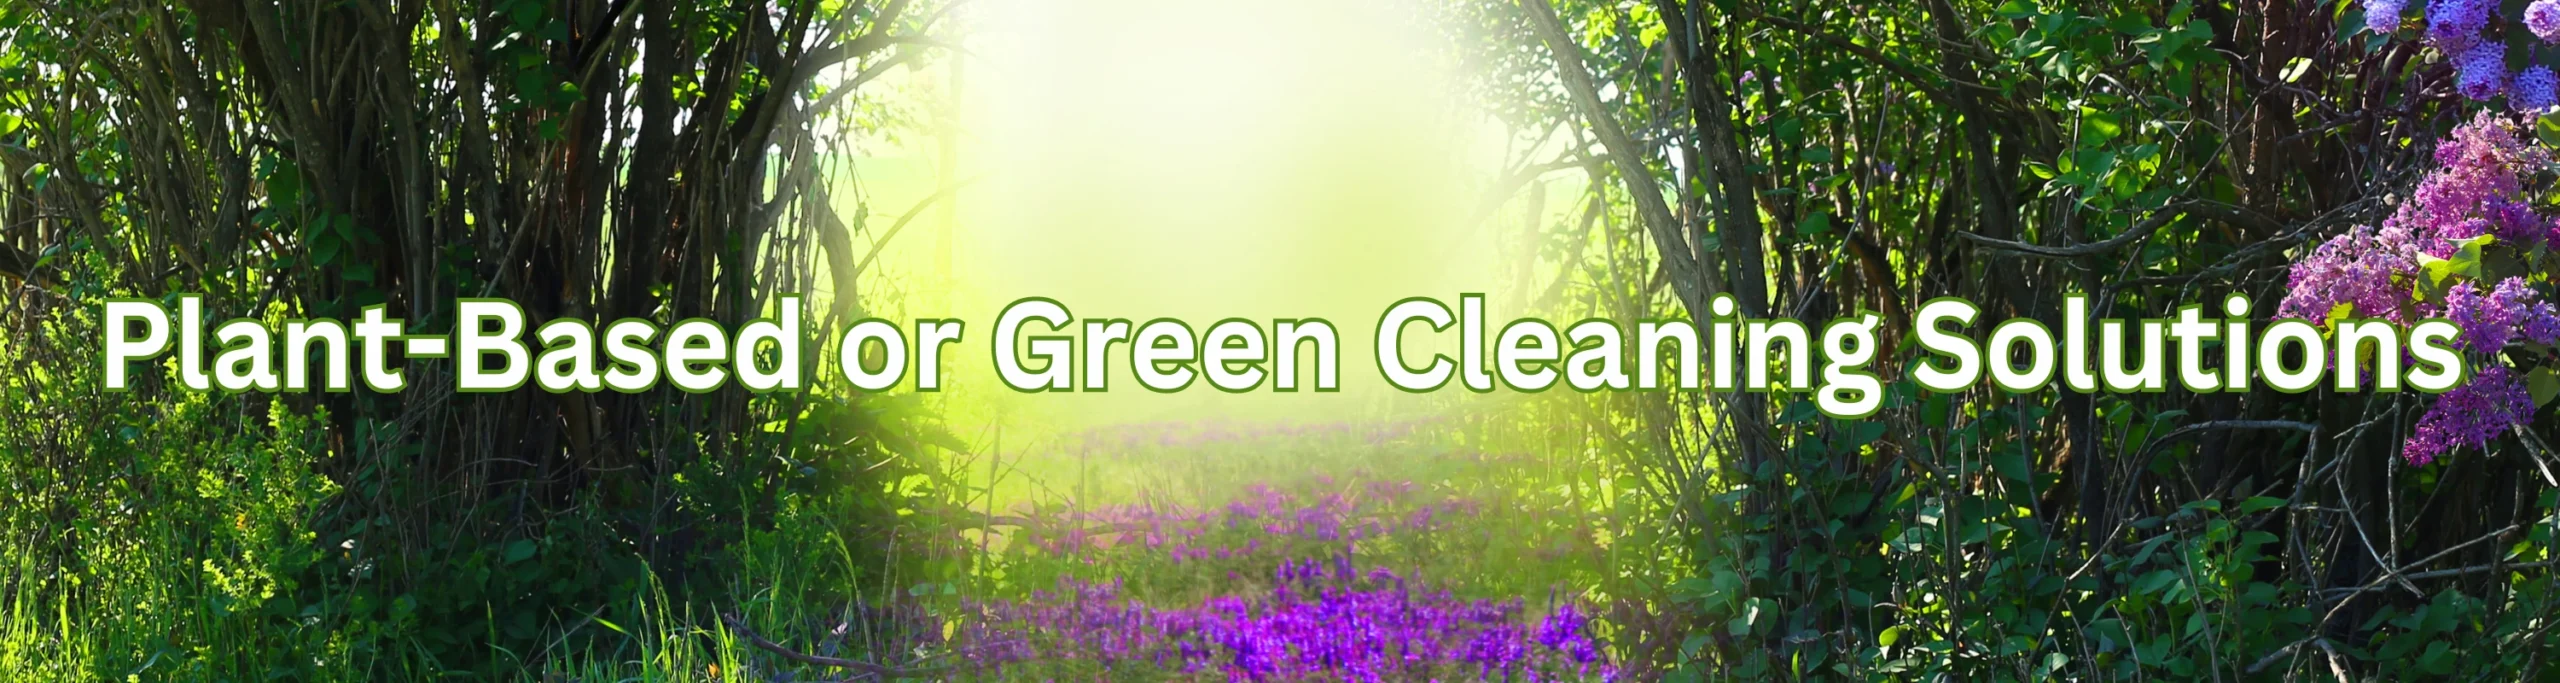 Plant-Based or Green Cleaning (1)